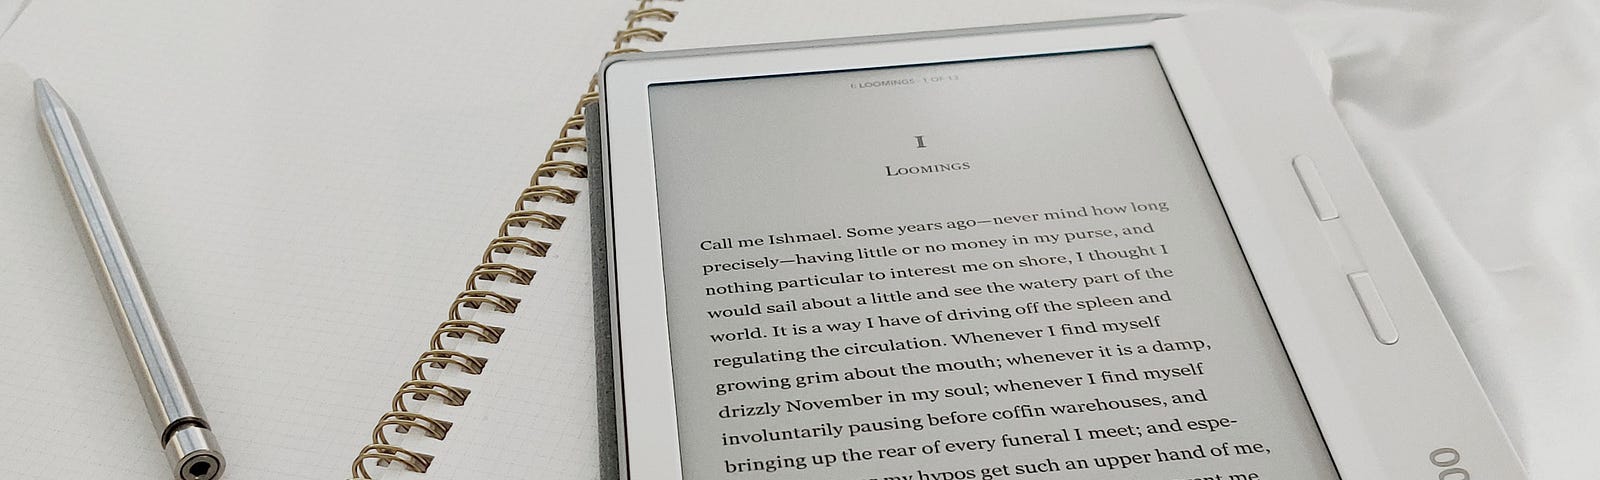 10 Things You Need to Know Before Creating an E-Book